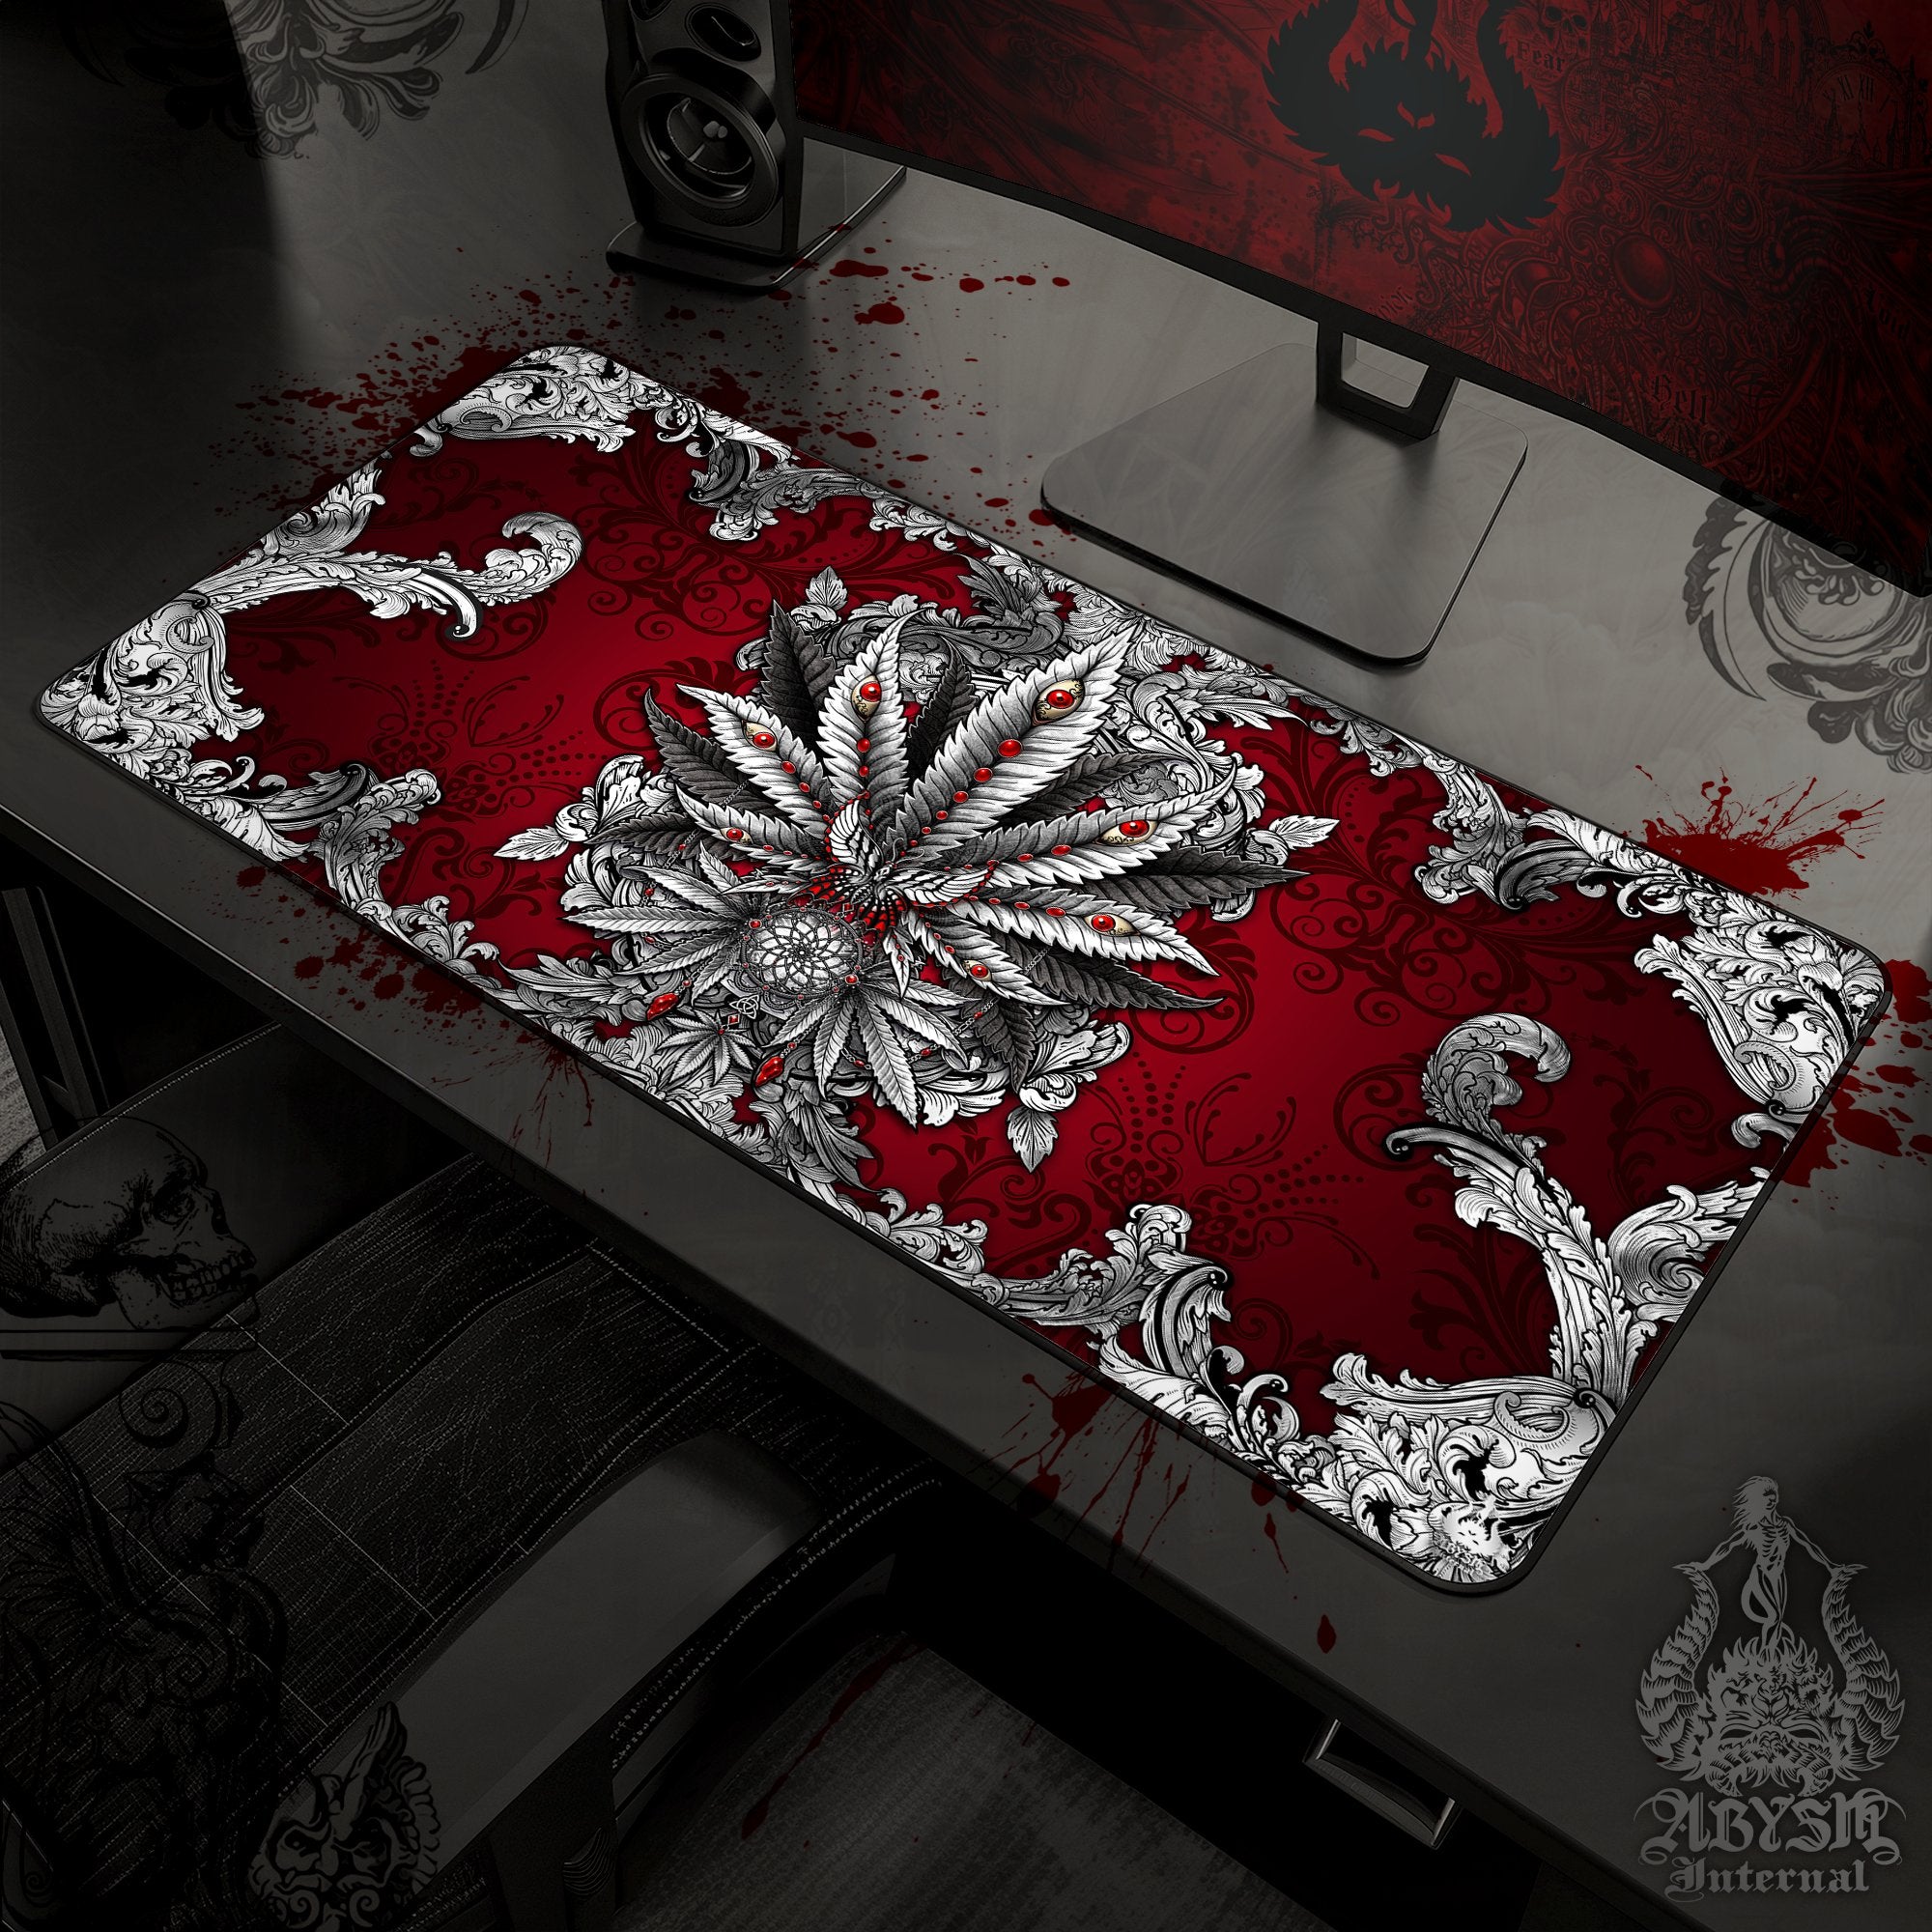 Silver Weed Mouse Pad, Cannabis Gaming Desk Mat, 420 Workpad, Marijuana Table Protector Cover, Art Print - Abysm Internal